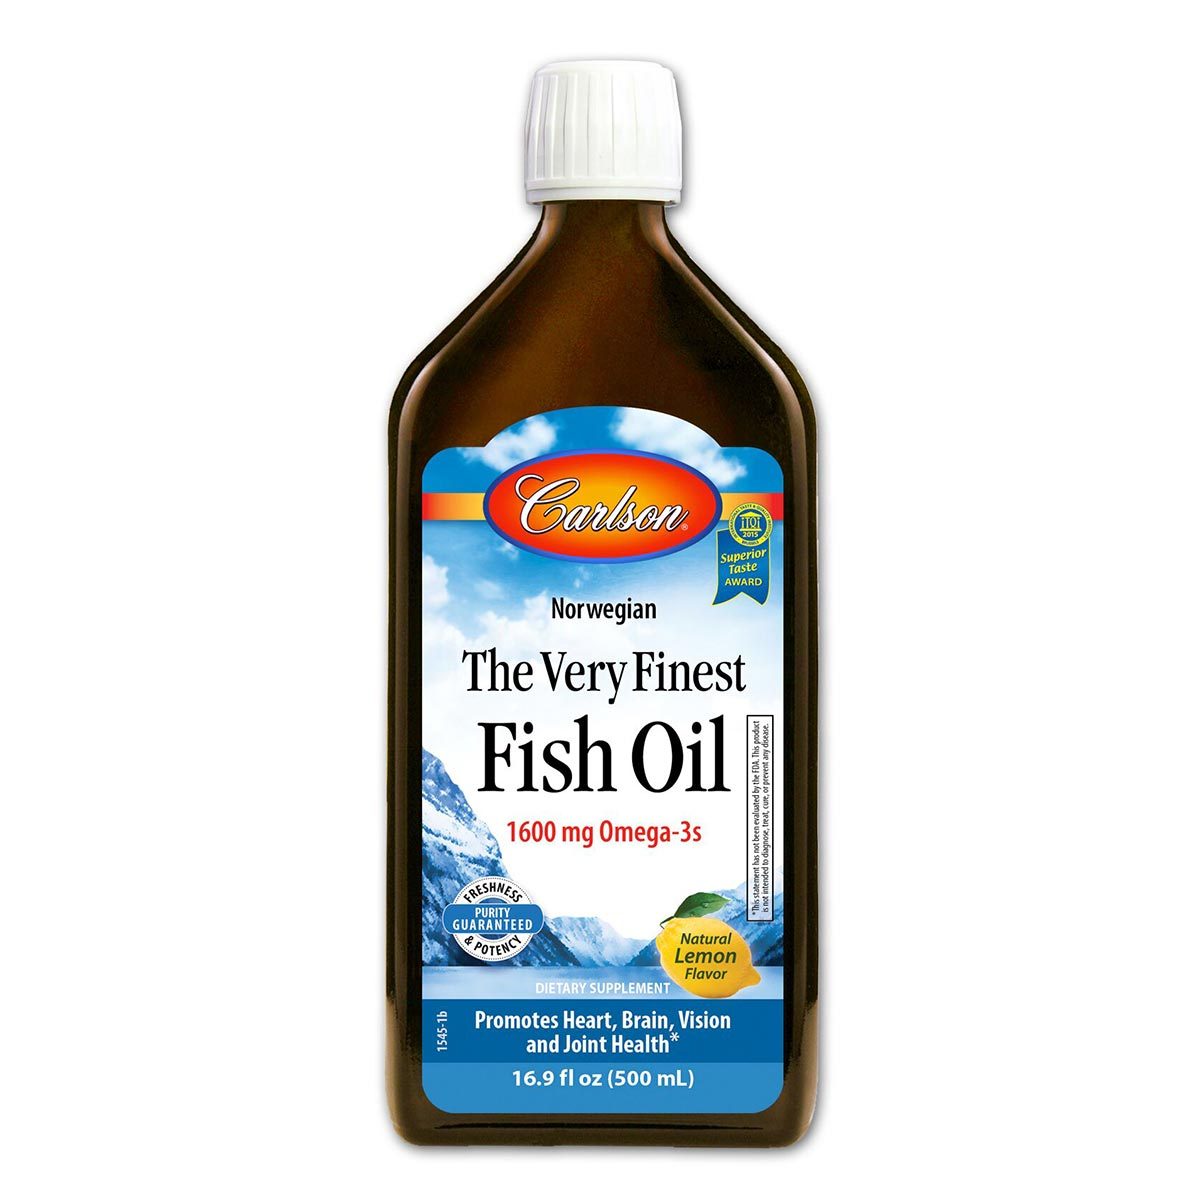 Primary image of The Very Finest Fish Oil - Lemon